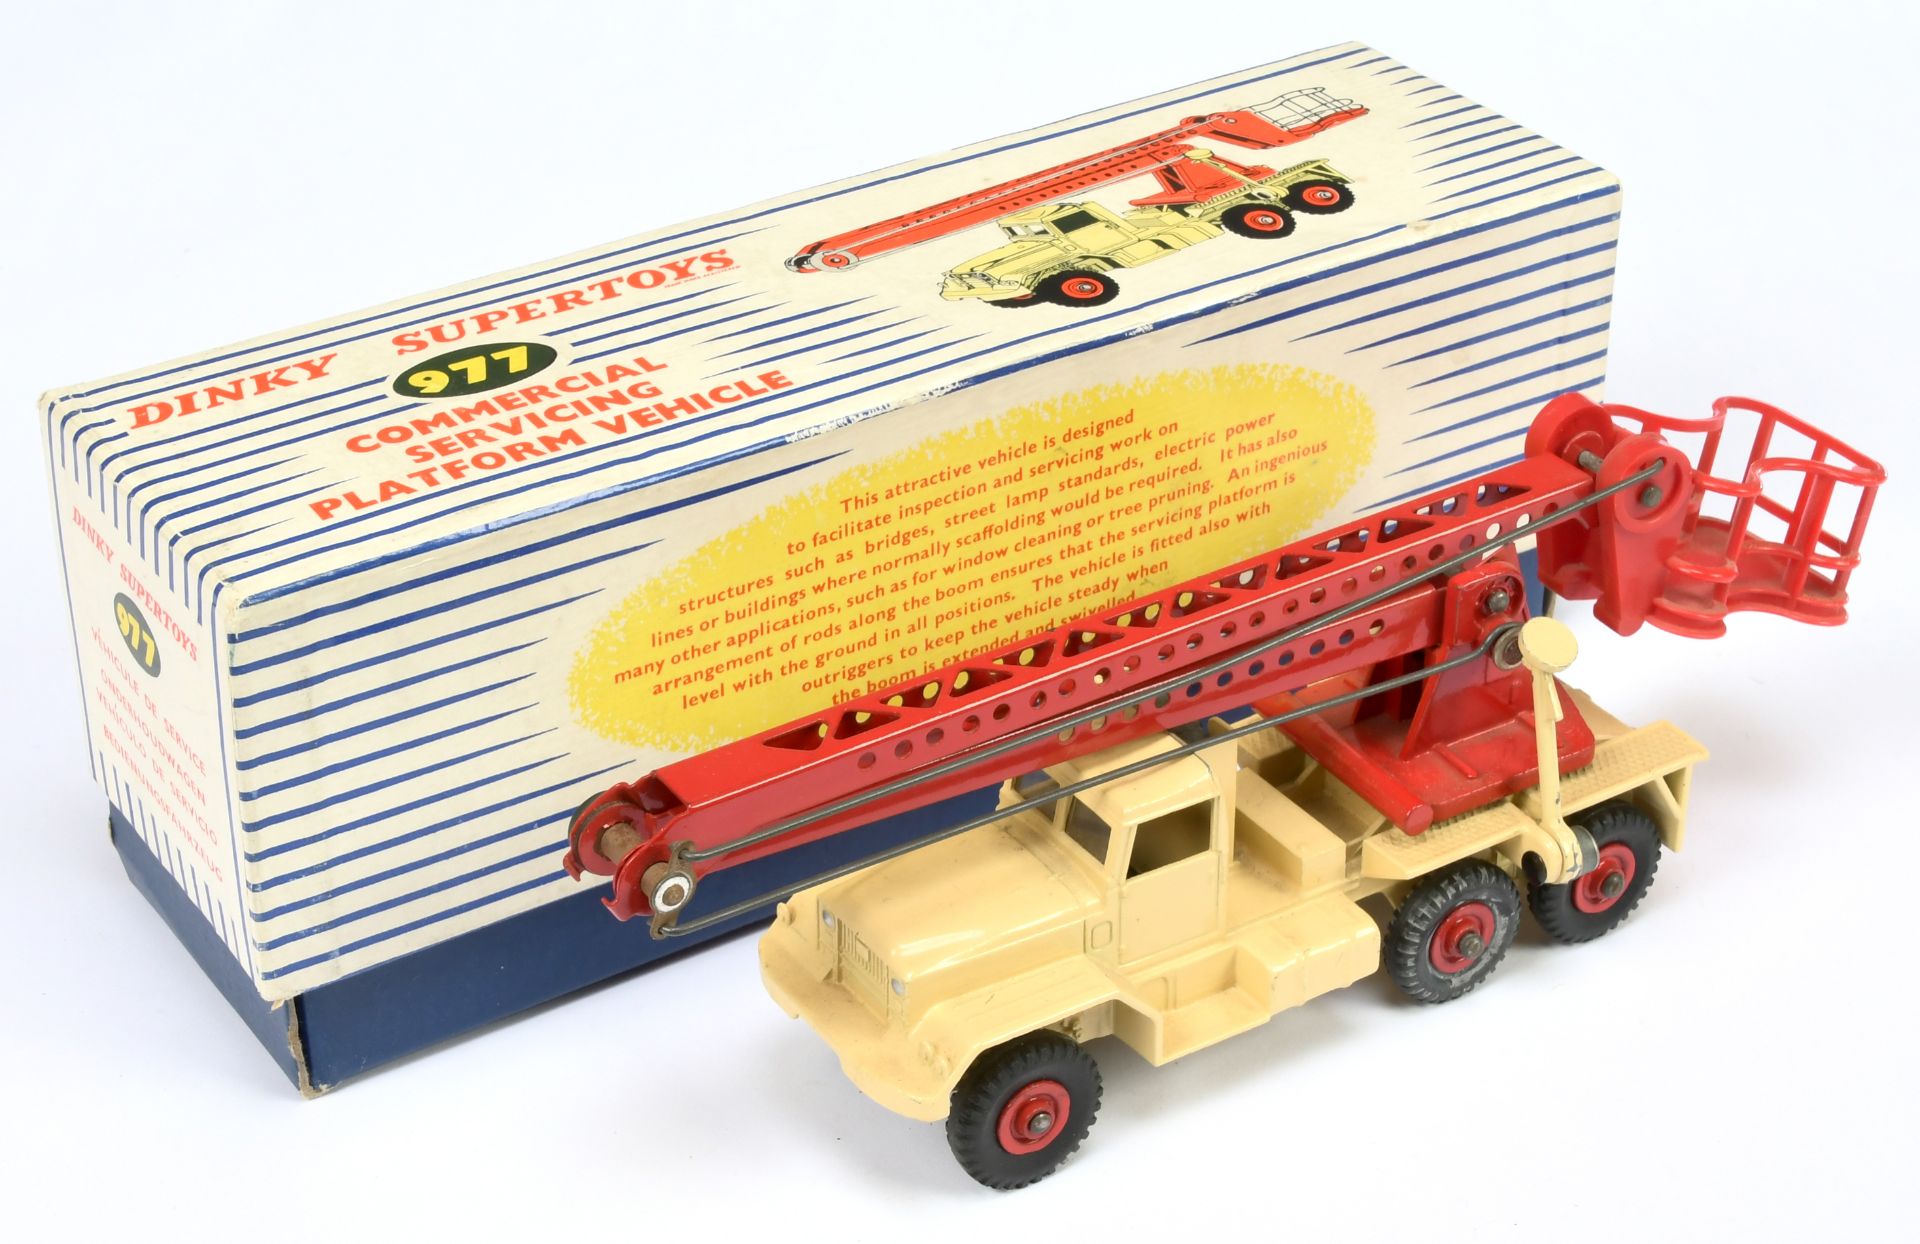 Dinky Toys 977 Commercial servicing Platform Vehicle - Cream body and chassis, red supertoy hubs,...